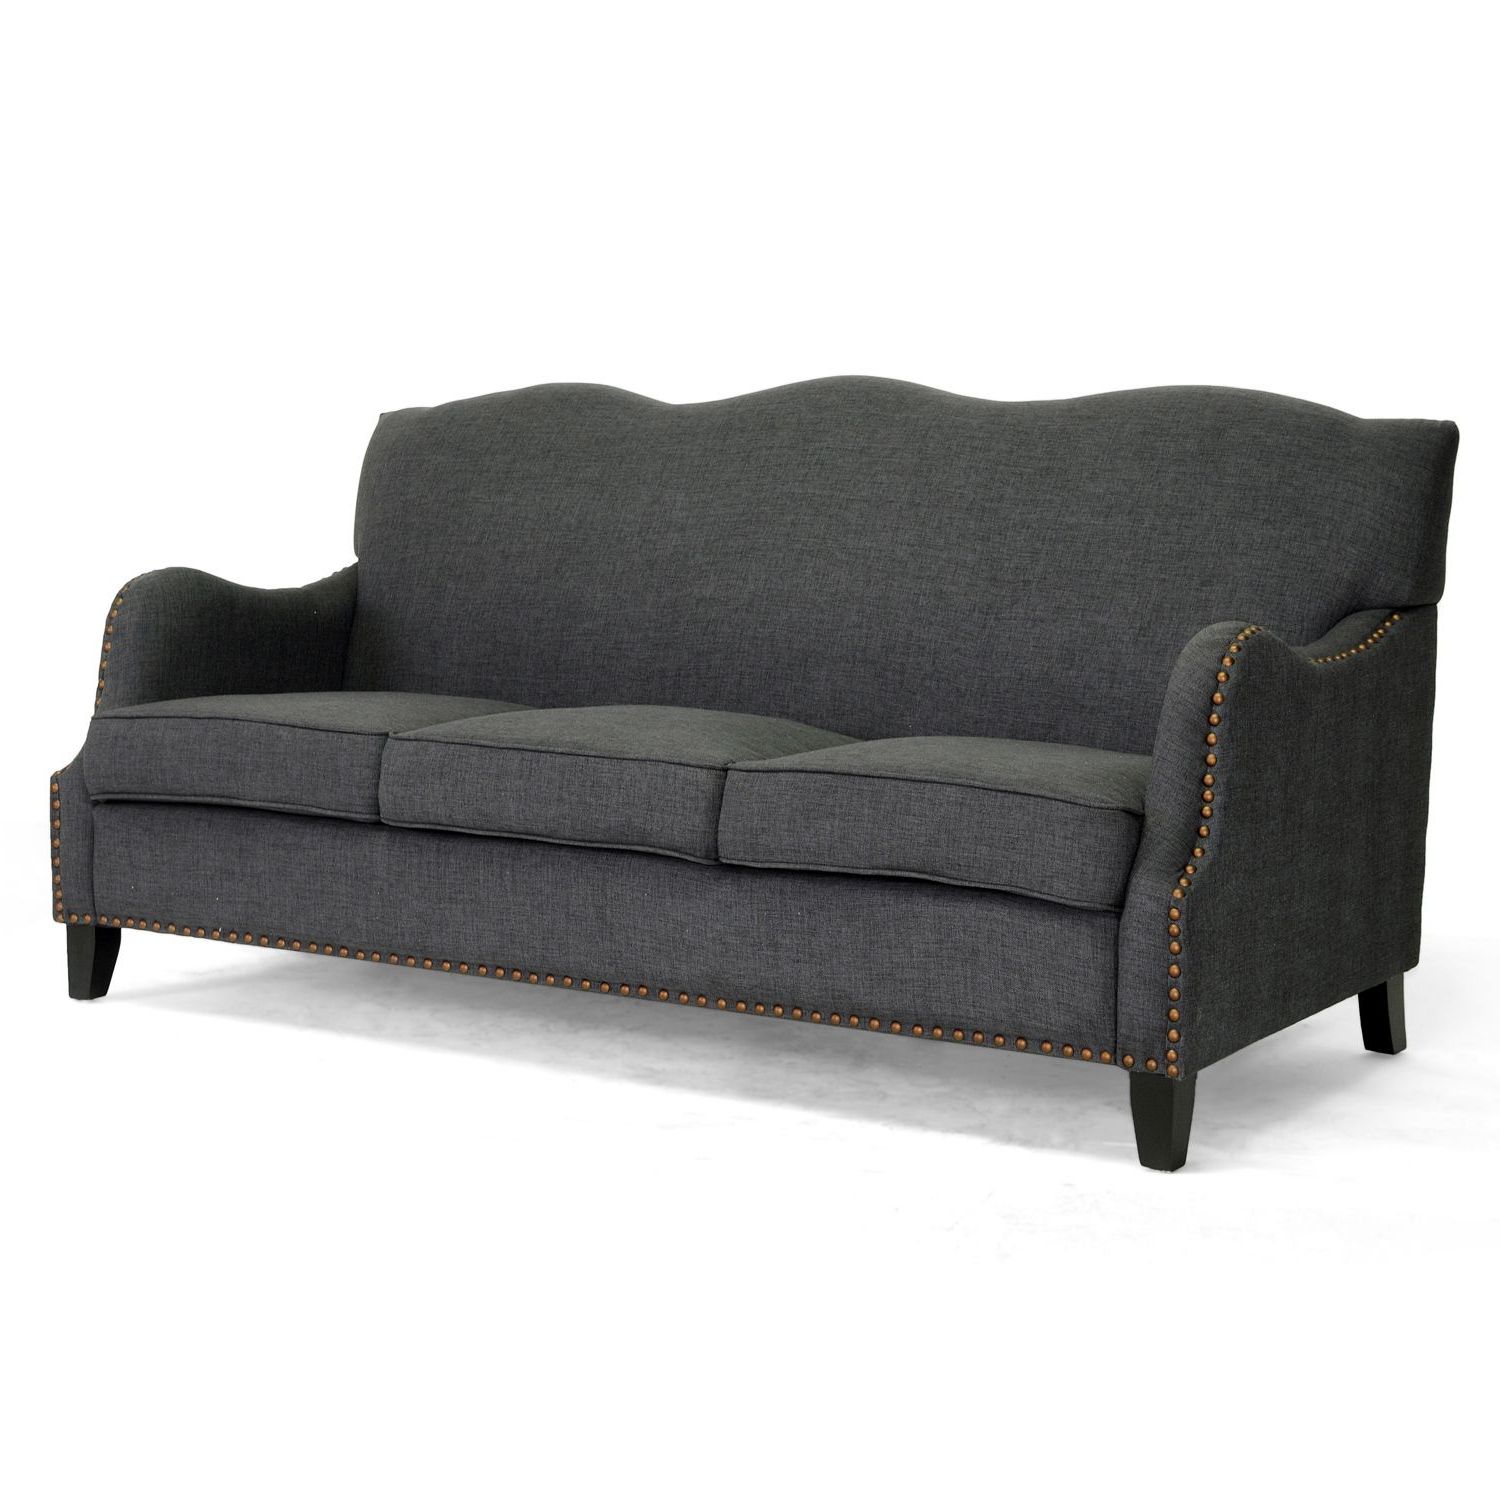 Gray Linen Sofas With Regard To Famous The Dark Charcoal Grey Linen Sofa Features Stylish Curves On The (View 15 of 15)